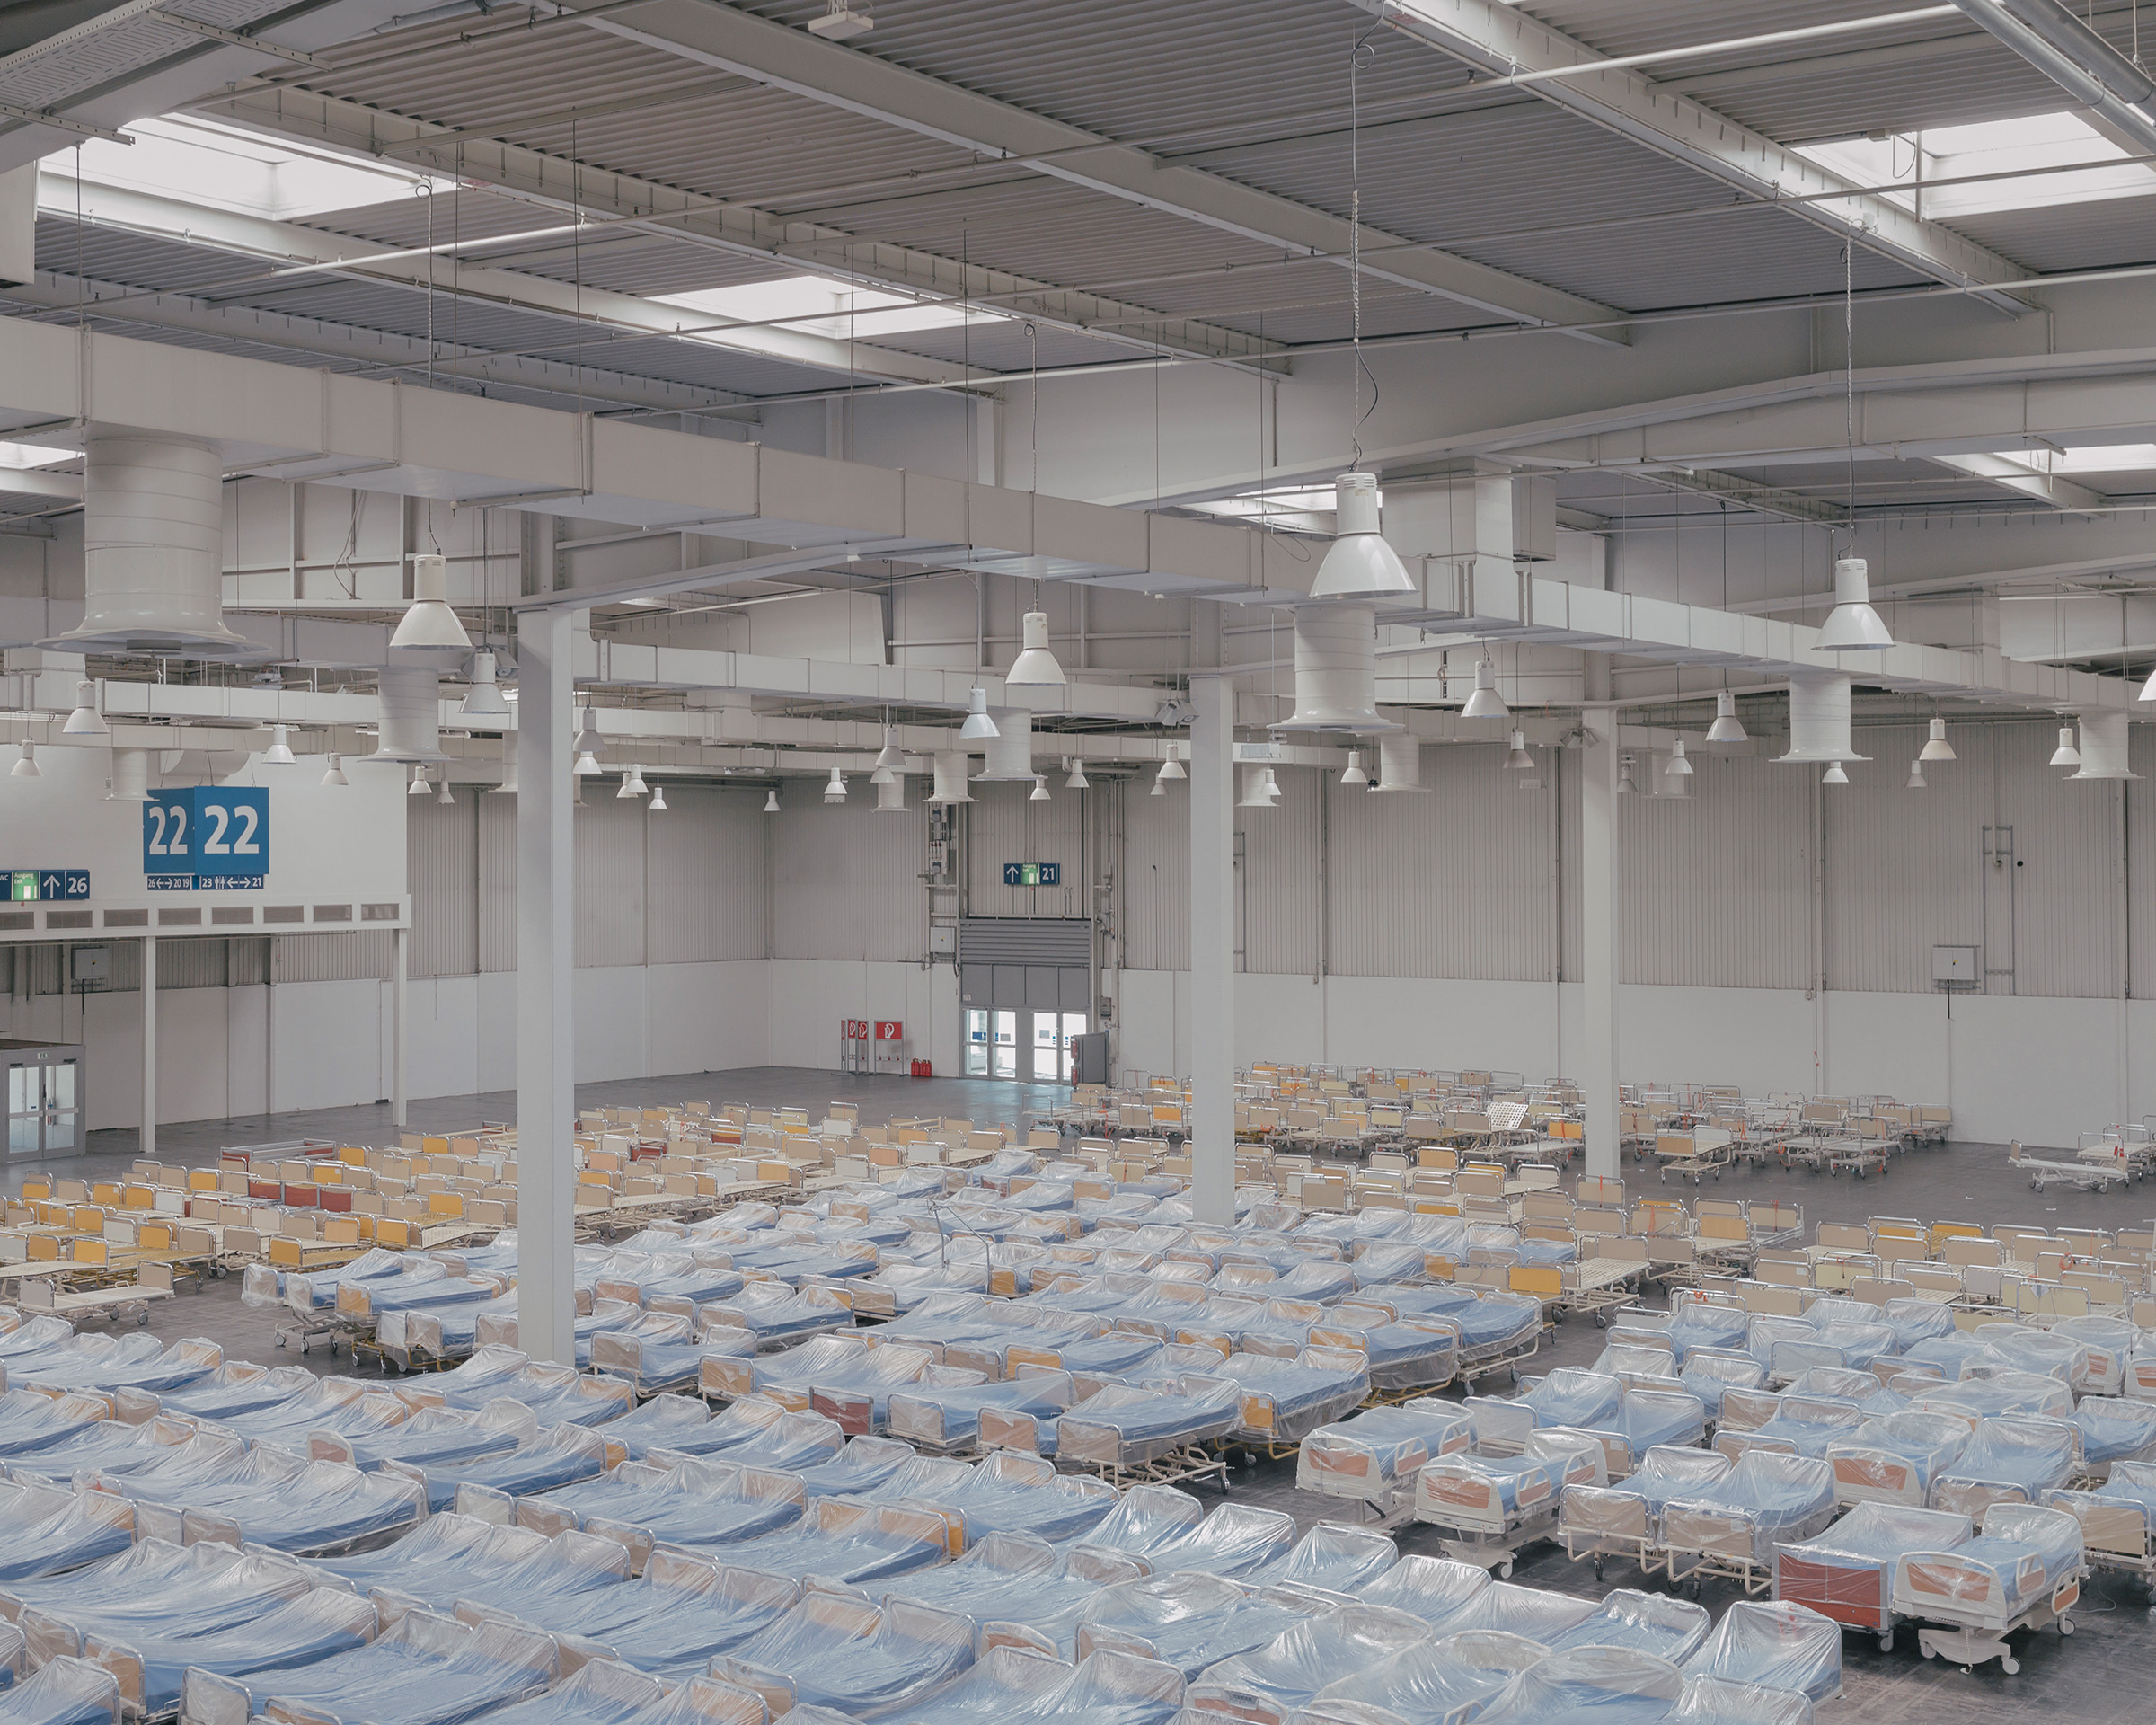 Hospital beds are set up on April 4 at a new hospital for treating coronavirus in an exhibition hall at the Hannover Messe trade fair in Hannover. Five hundred beds will be available across two halls. (Ingmar Björn Nolting—DOCKS Collective)